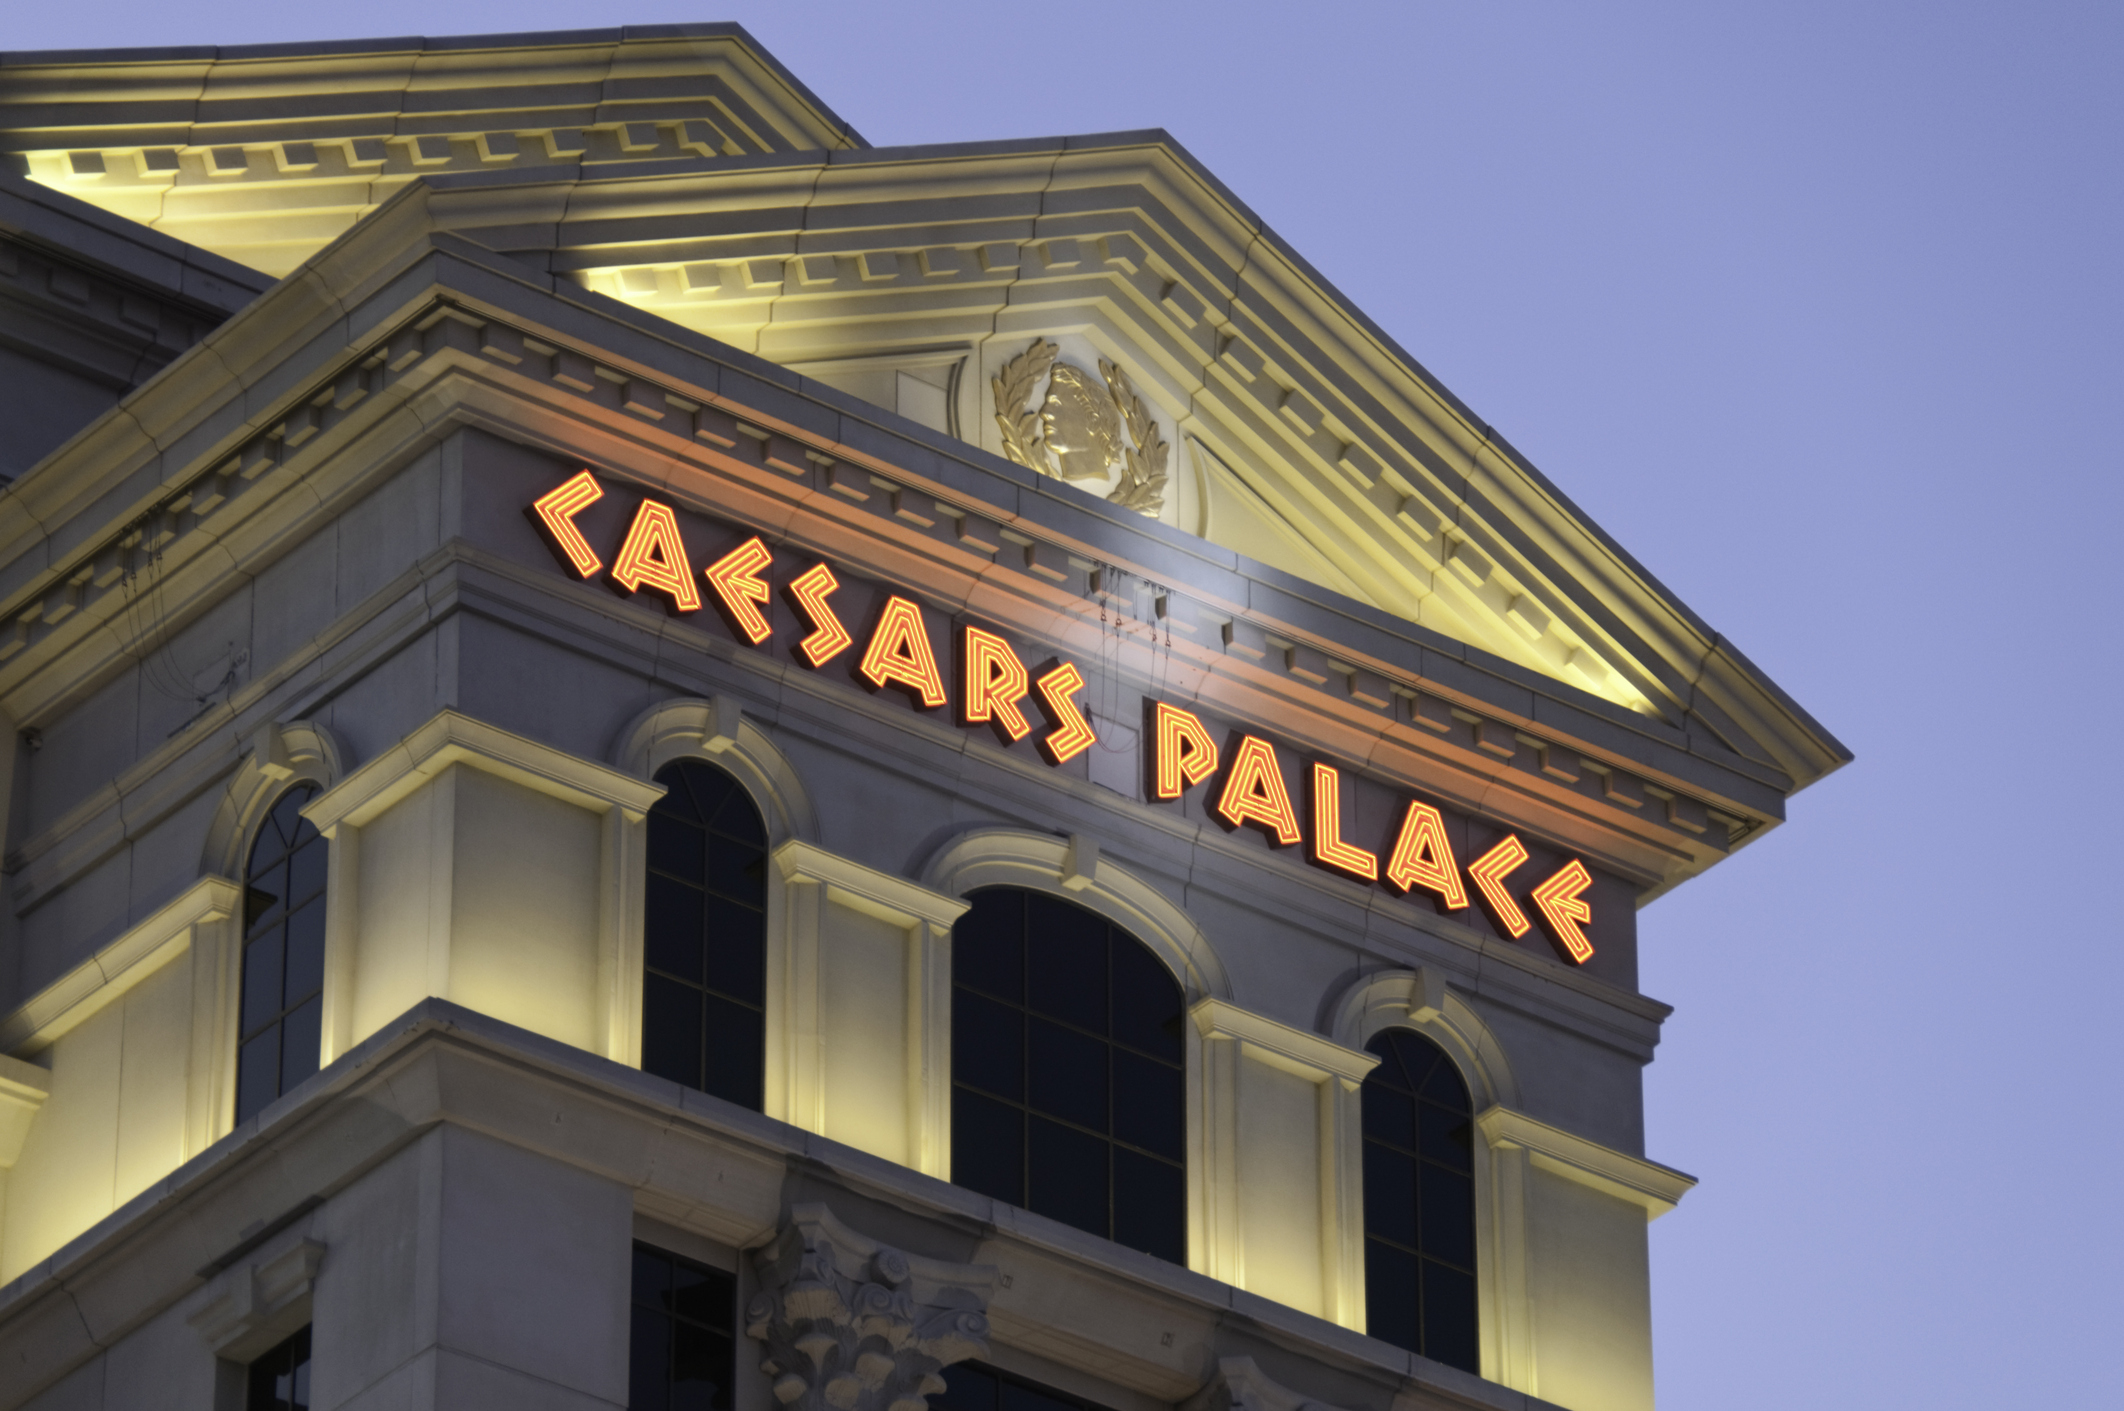 Loyalty360 - Caesars Launches Caesars Palace Online Casino App with Online  Play Linked to Member Rewards